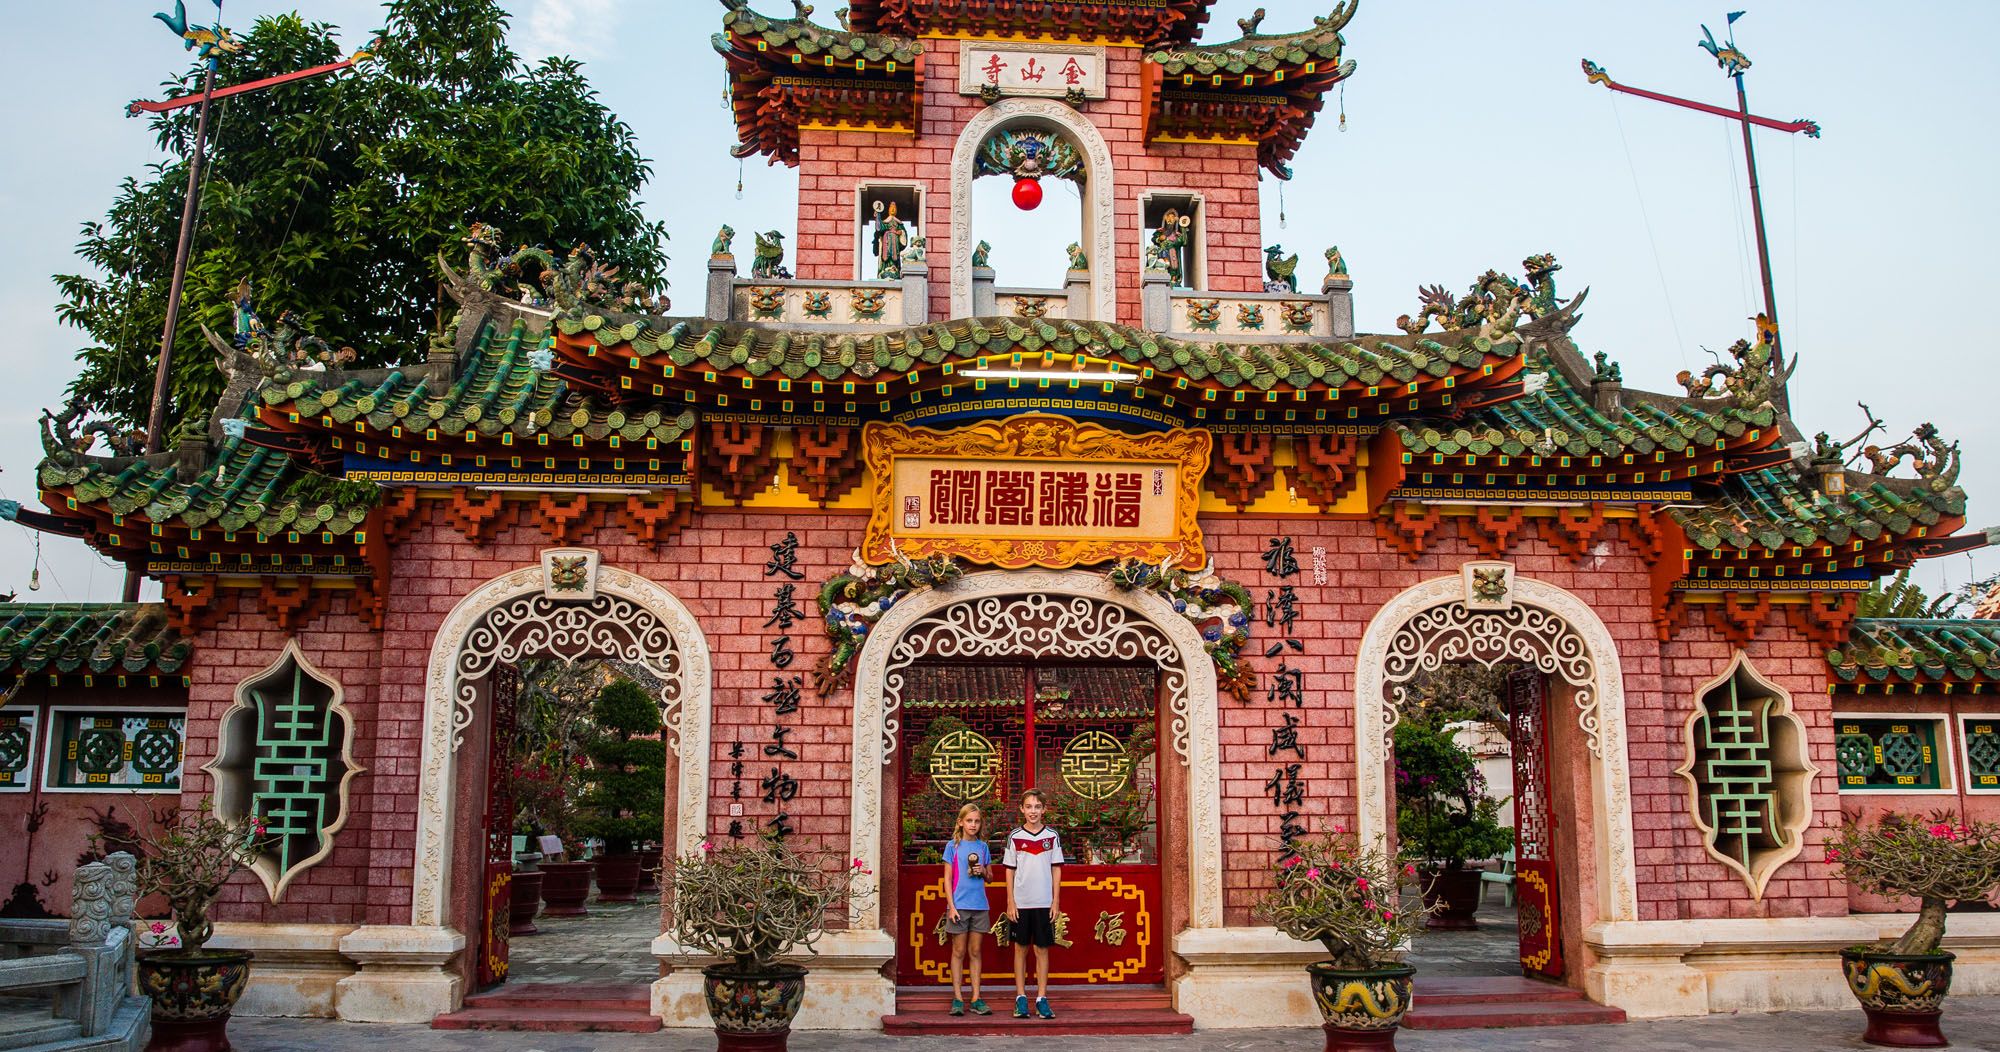 Featured image for “Wishing We Had More Time in Hoi An”